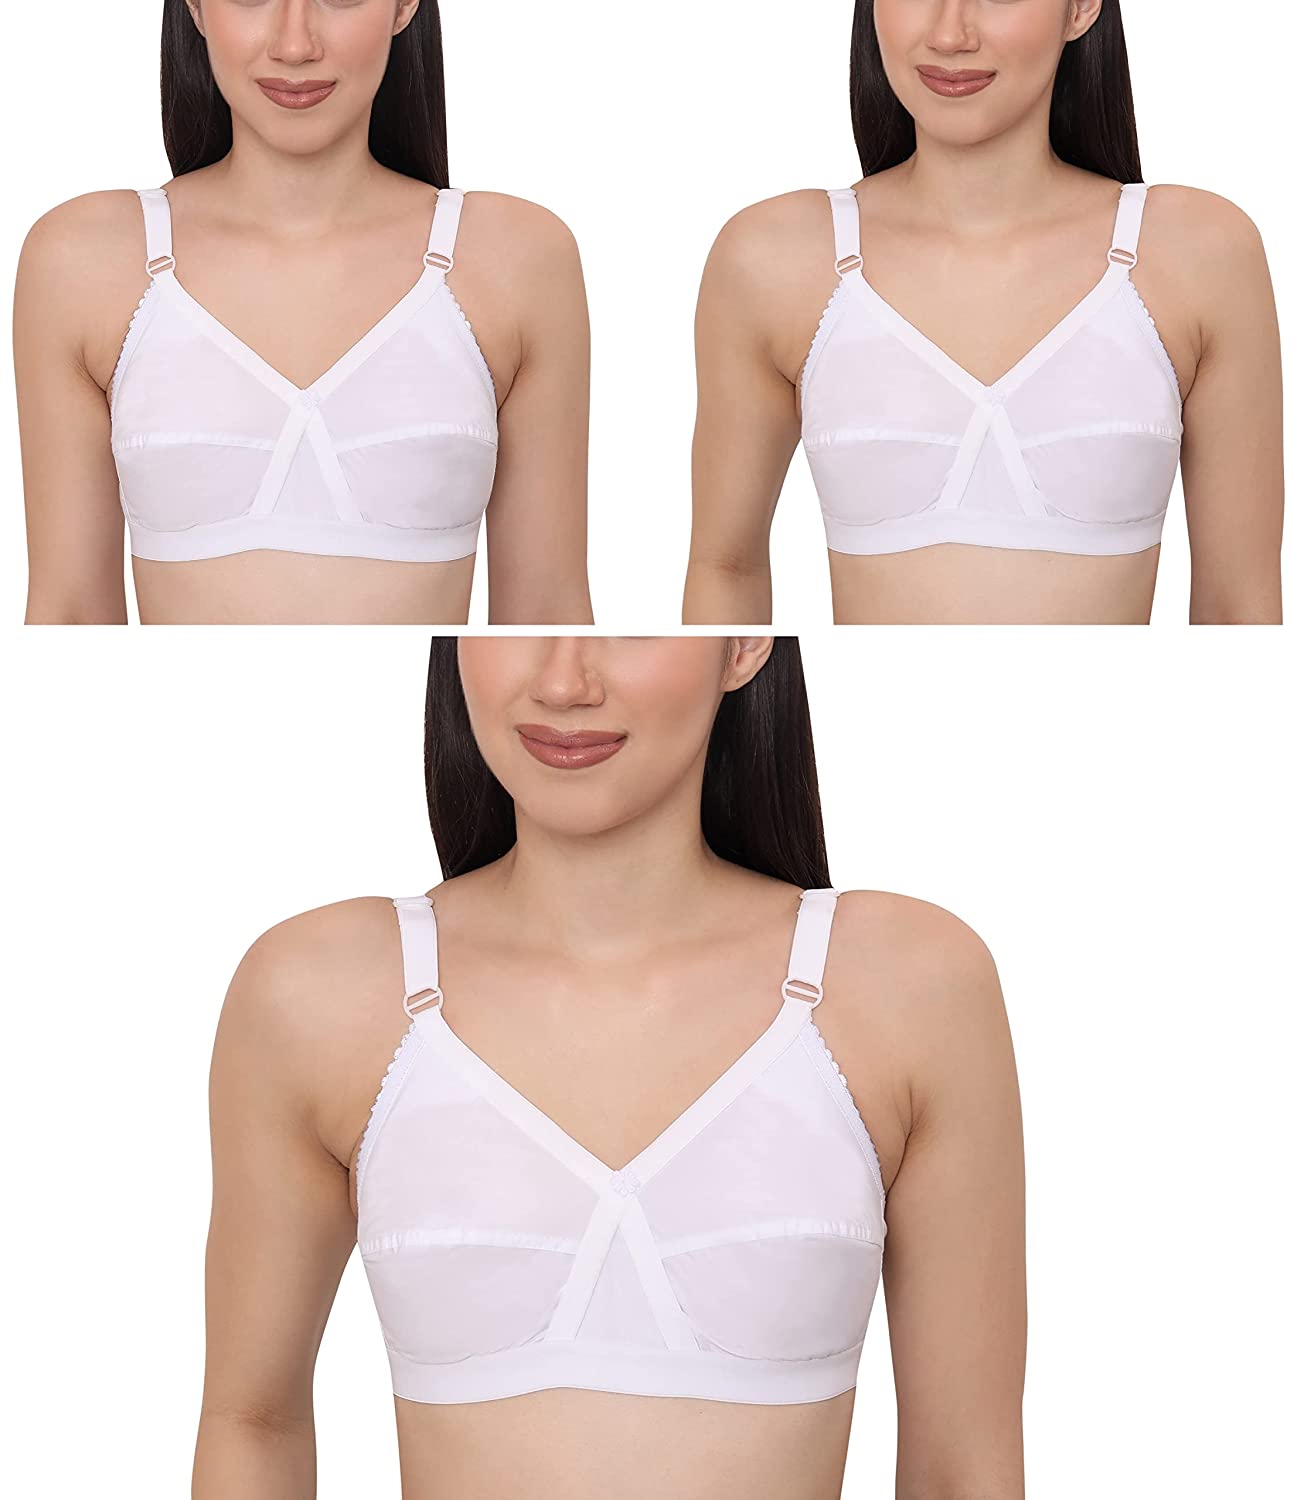 Comfy Cotton Blend Seamless Molded Cup Non-Padded Bra For Women (Pack Of 3)  at Rs 440.00, Pure Cotton Bra, कपास ब्रा - Suncloud Systems, Rajapalayam